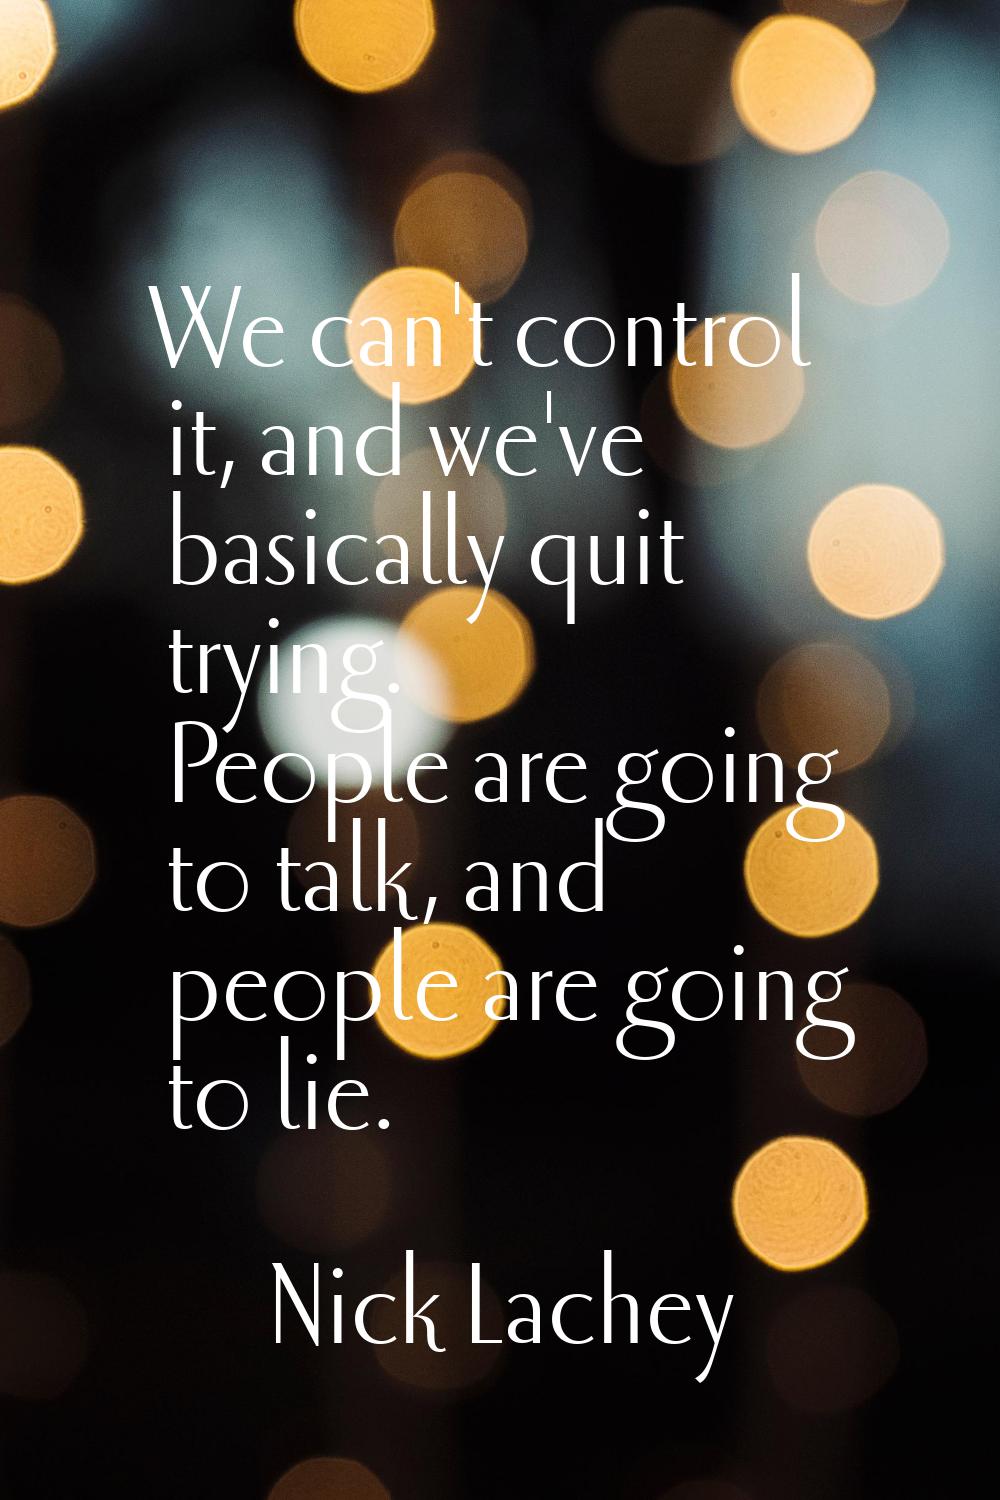 We can't control it, and we've basically quit trying. People are going to talk, and people are goin